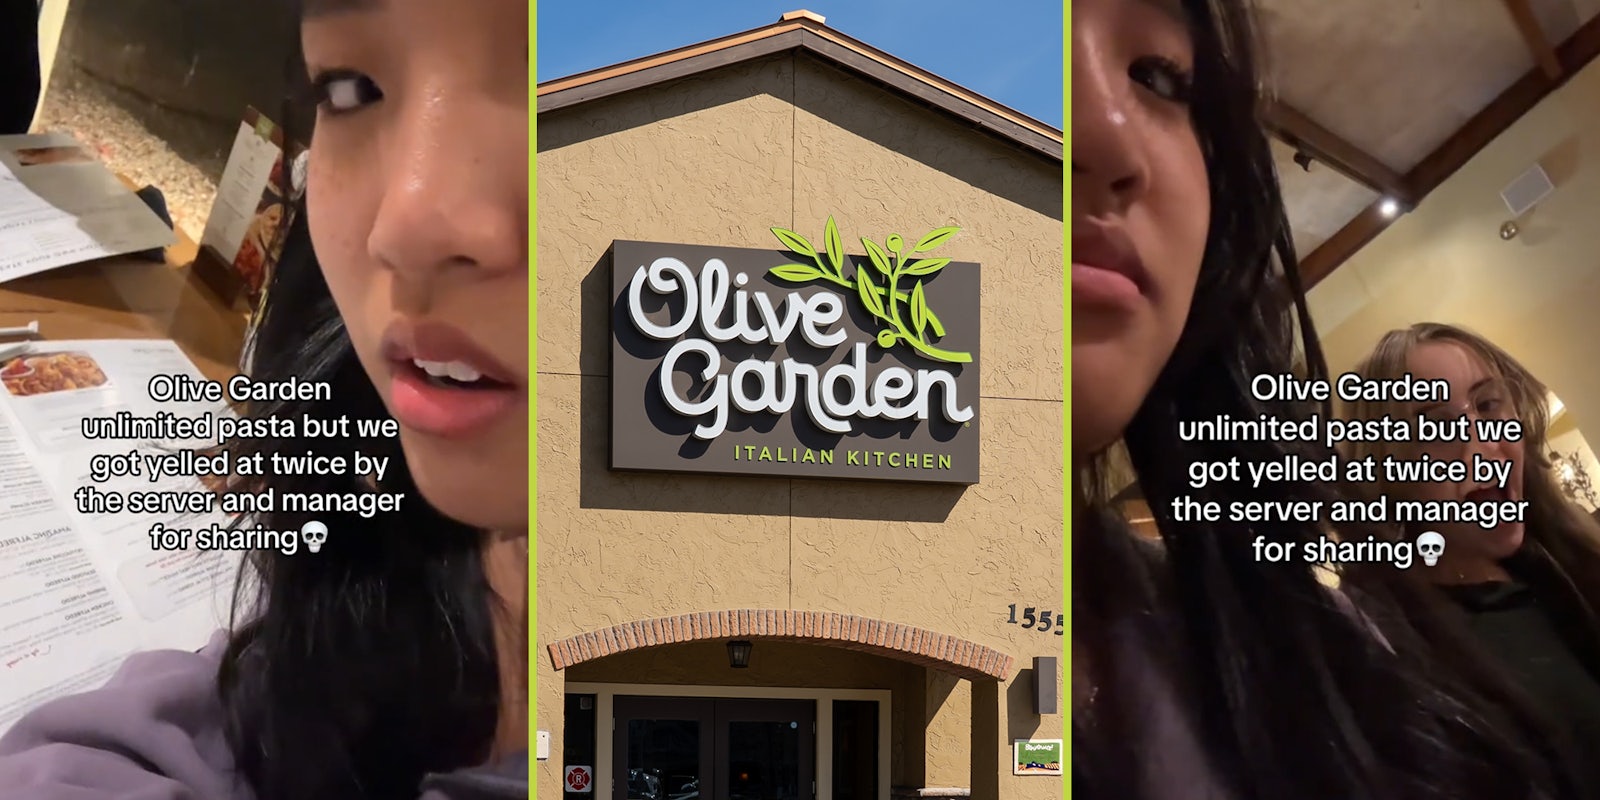 Olive Garden customers say both server and manager yelled at them for sharing unlimited pasta